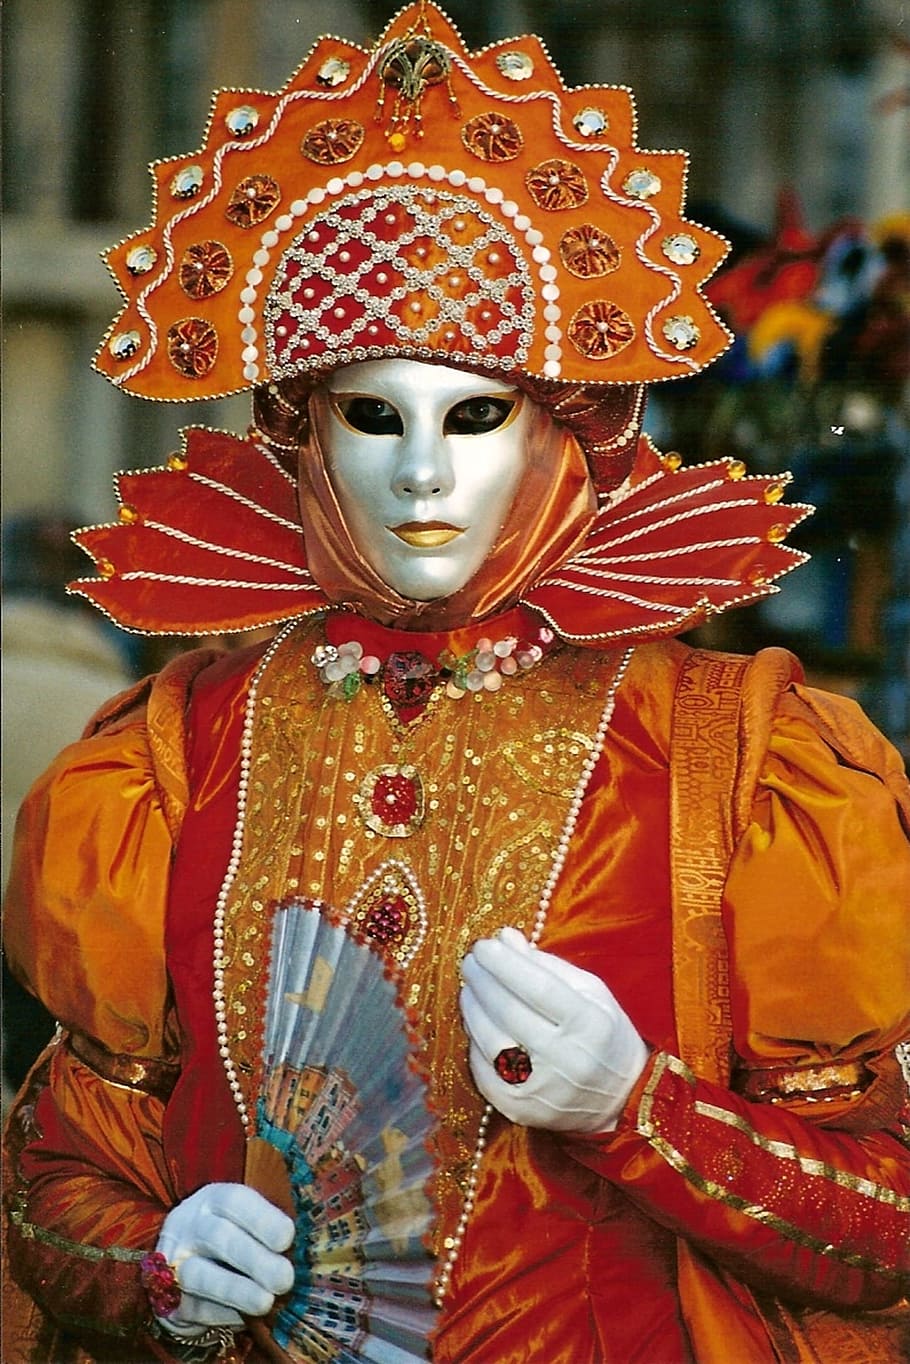 person in brown and orange traditional outfit holding fan, mask